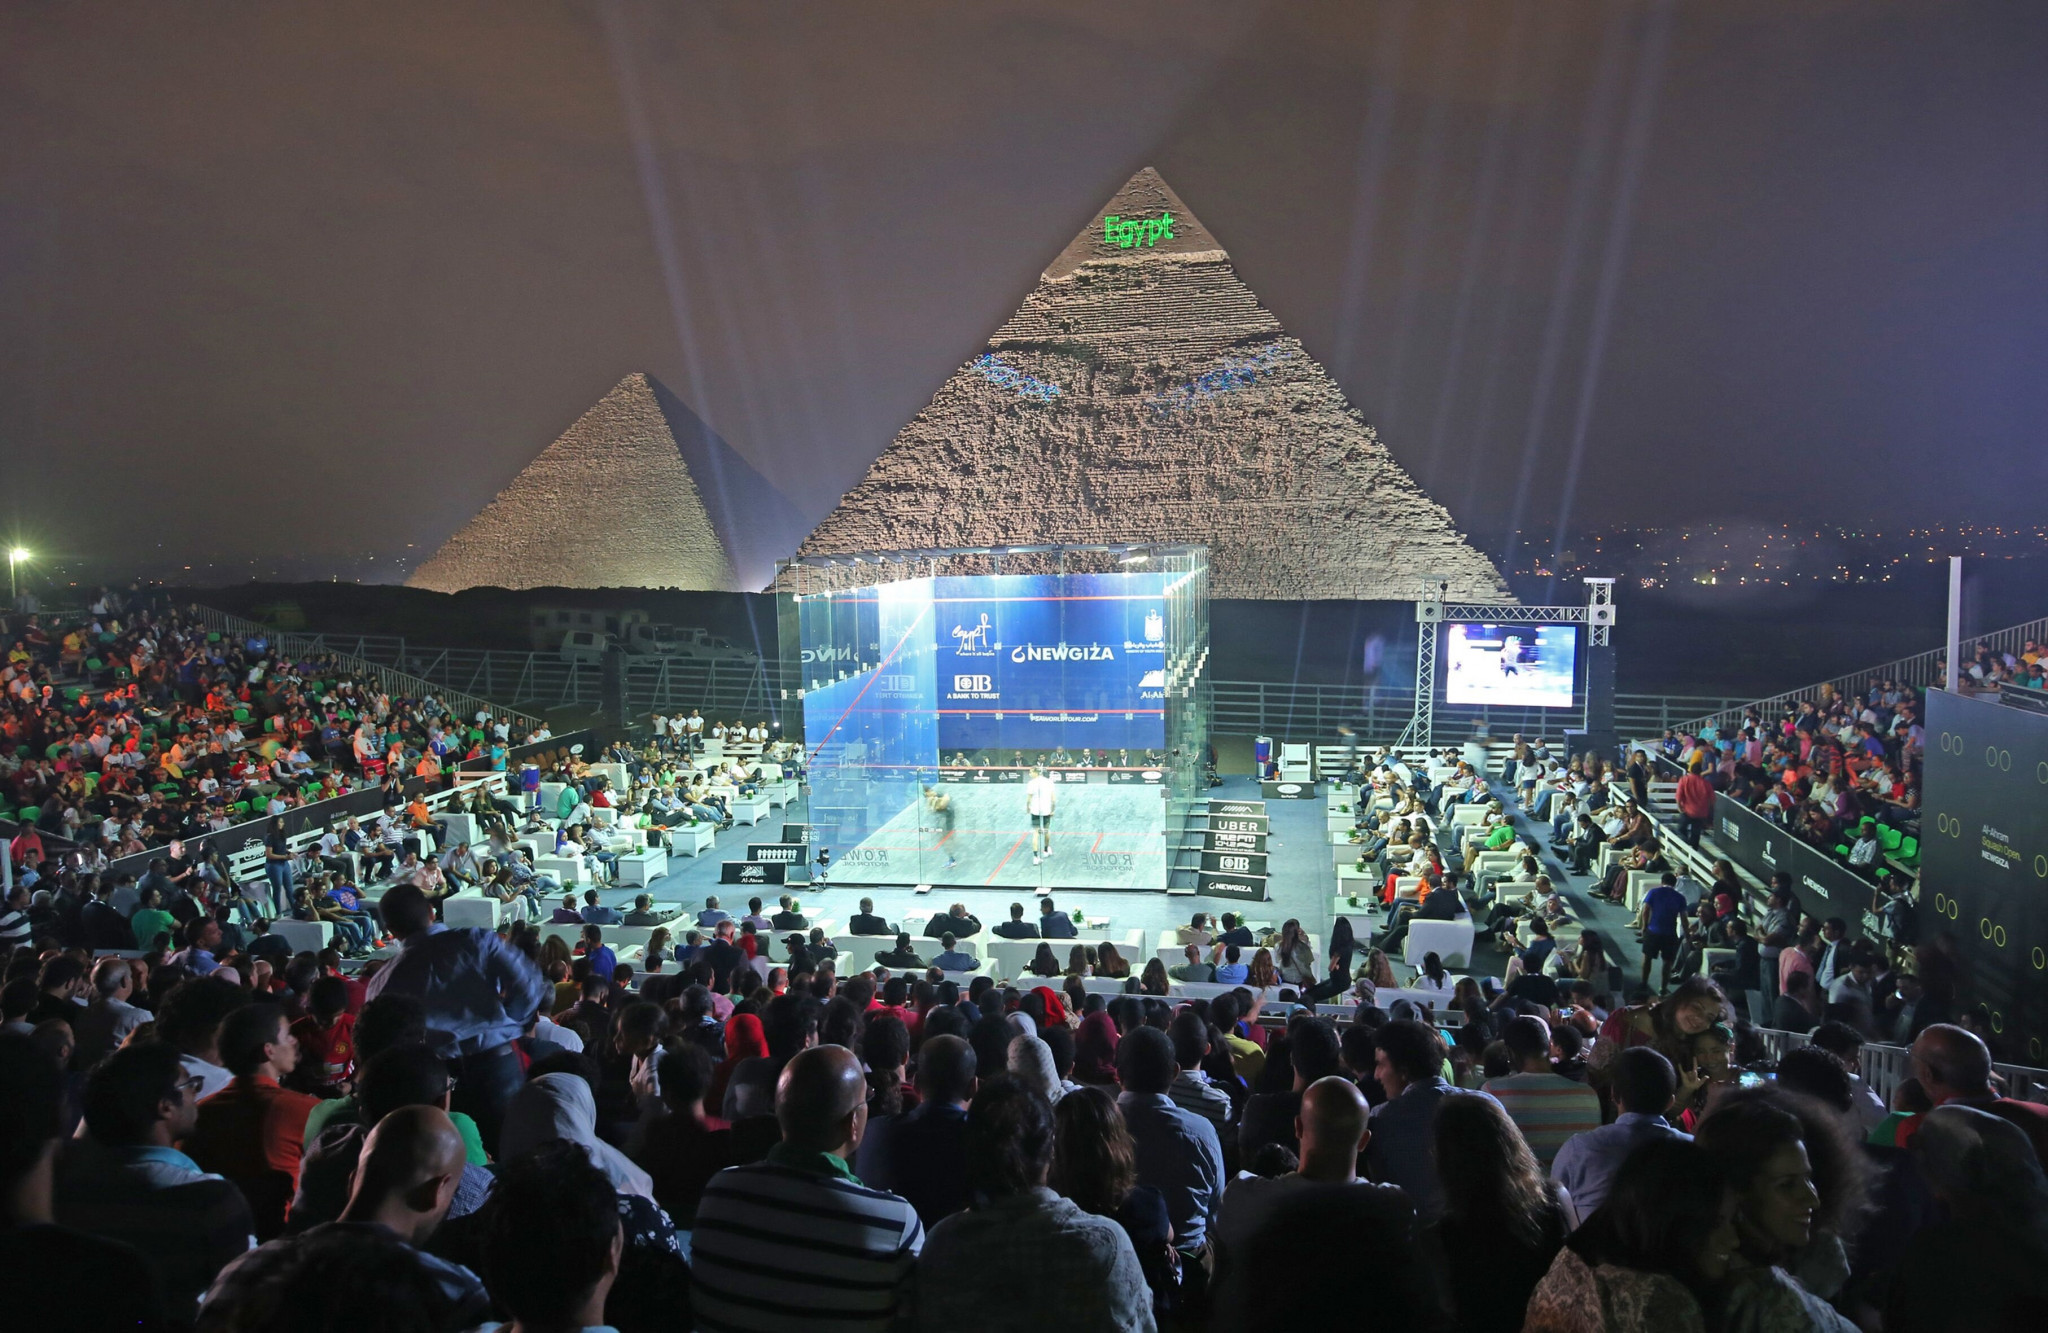 The 2019-2020 PSA Women's World Championship will take place in front of the Great Pyramid of Giza, the only ancient wonder of the world to remain largely in tact ©PSA